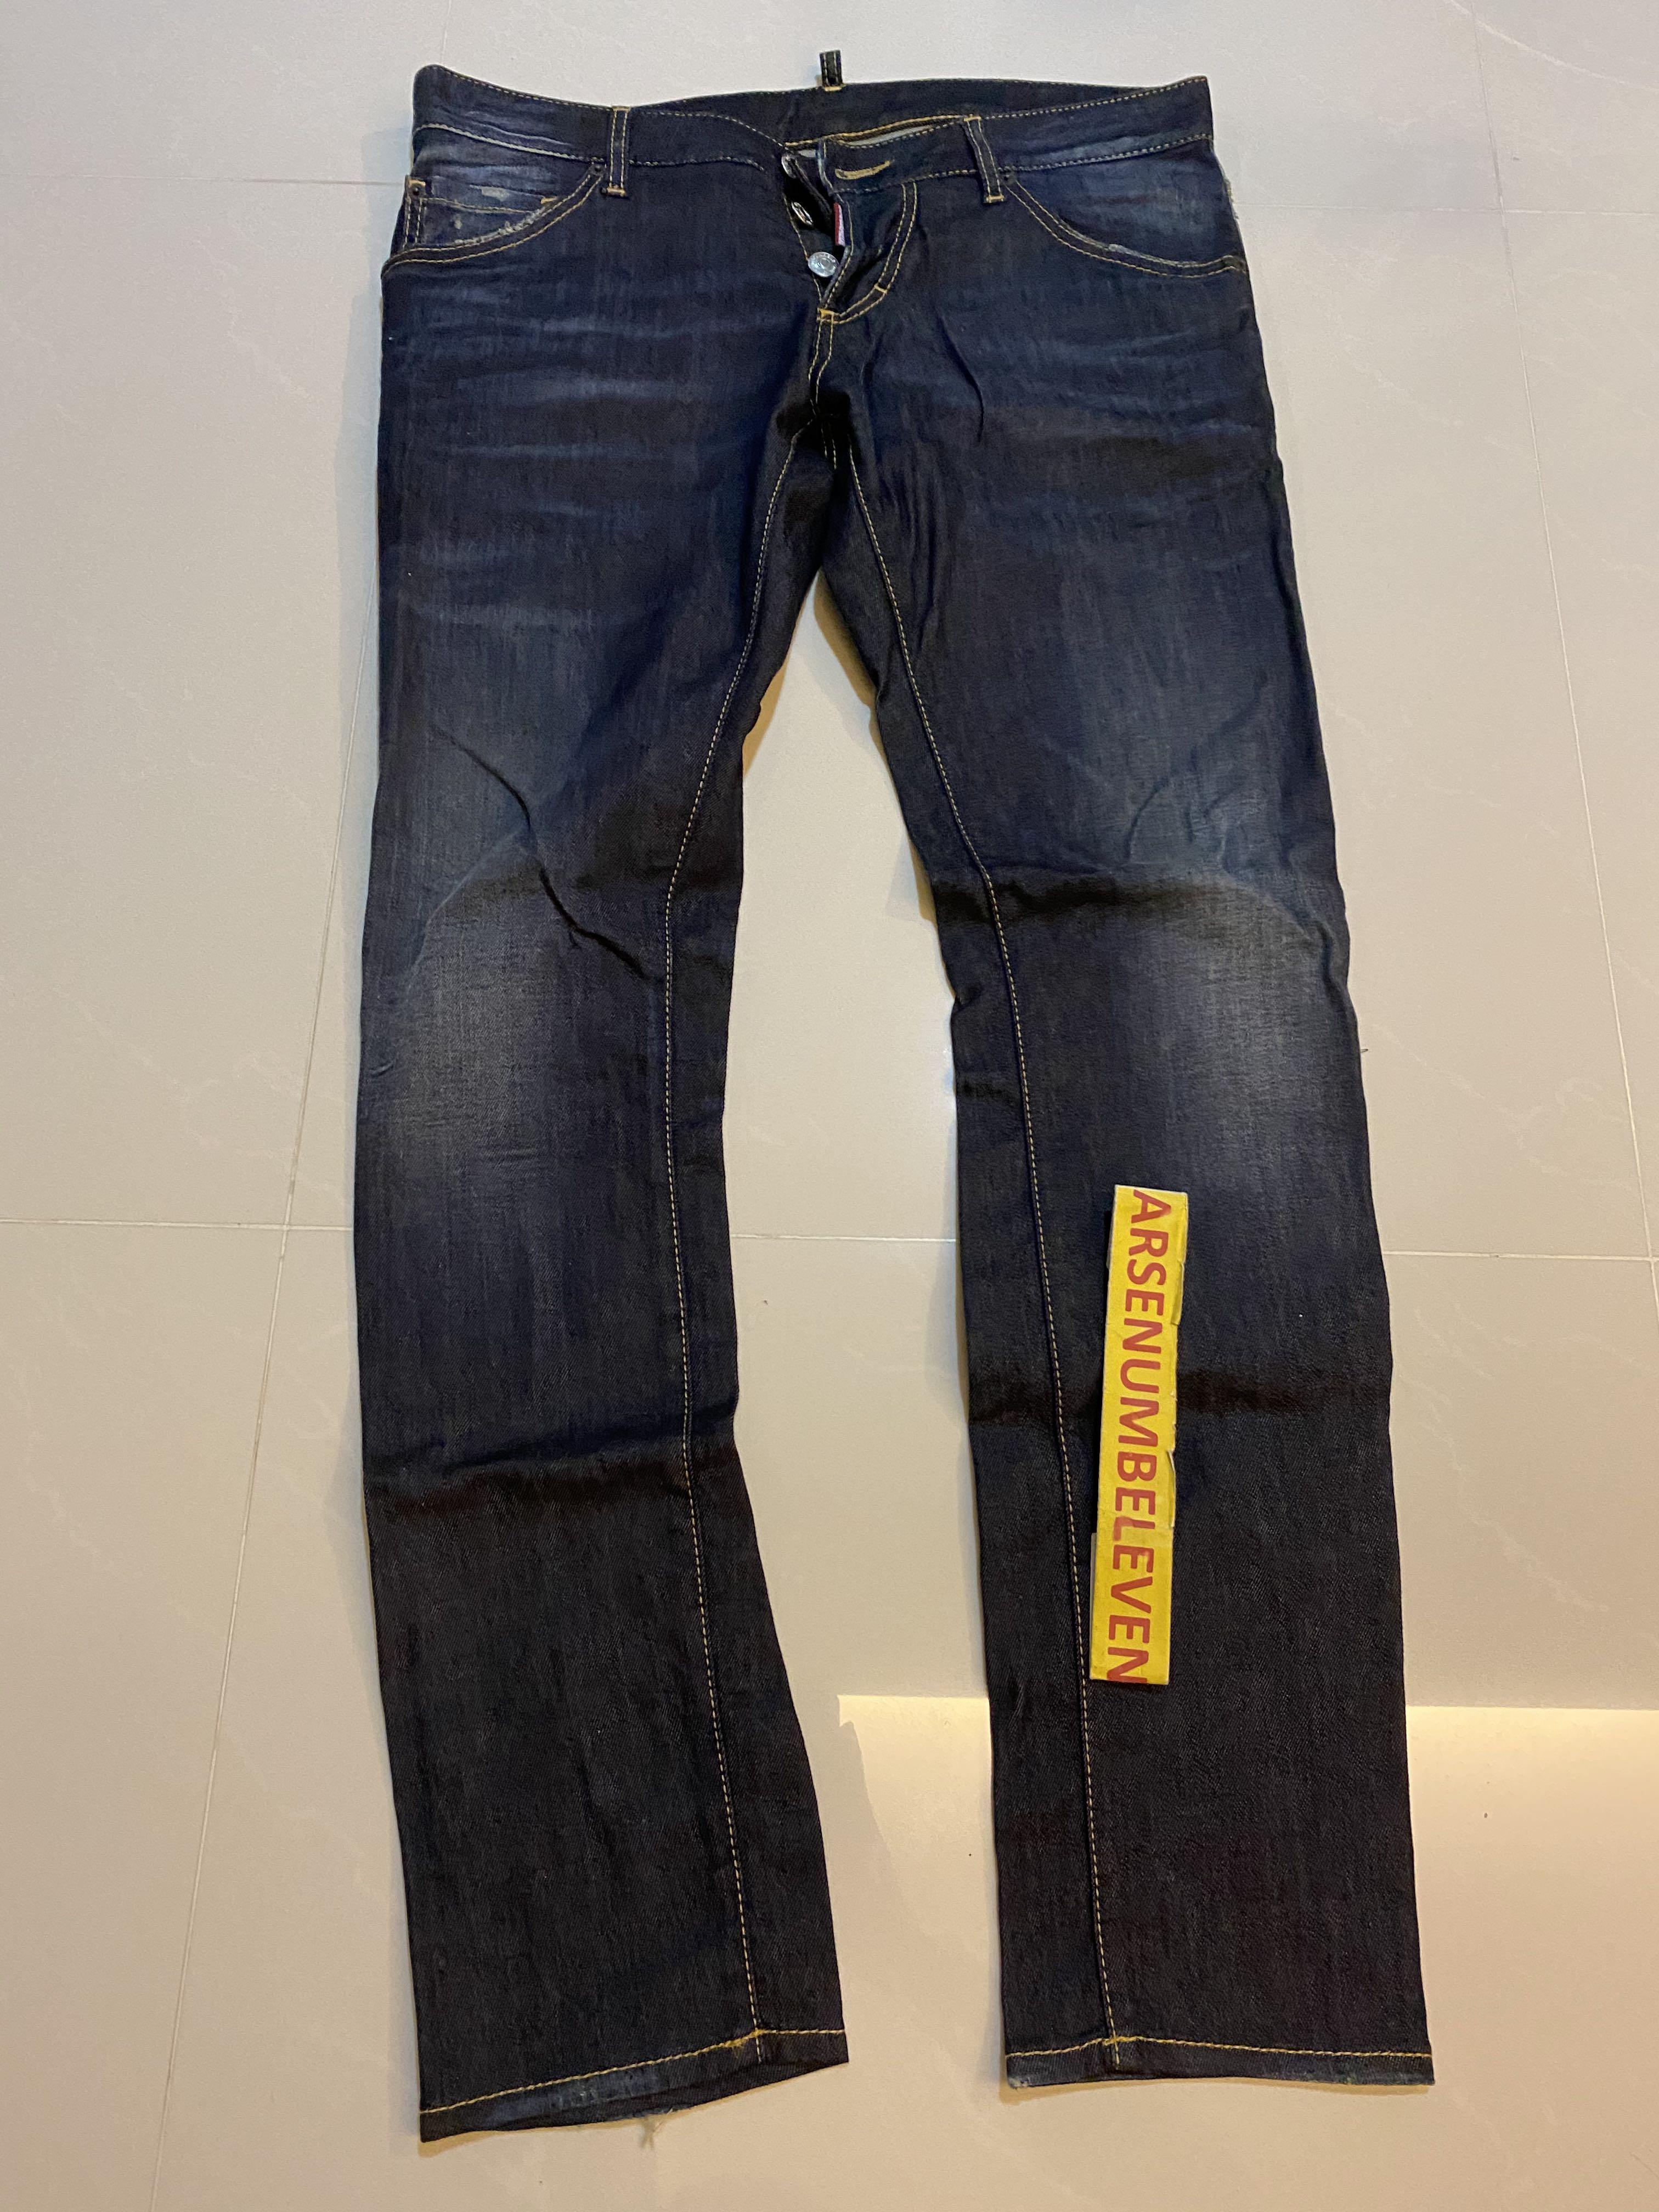 dsquared jeans 48 size